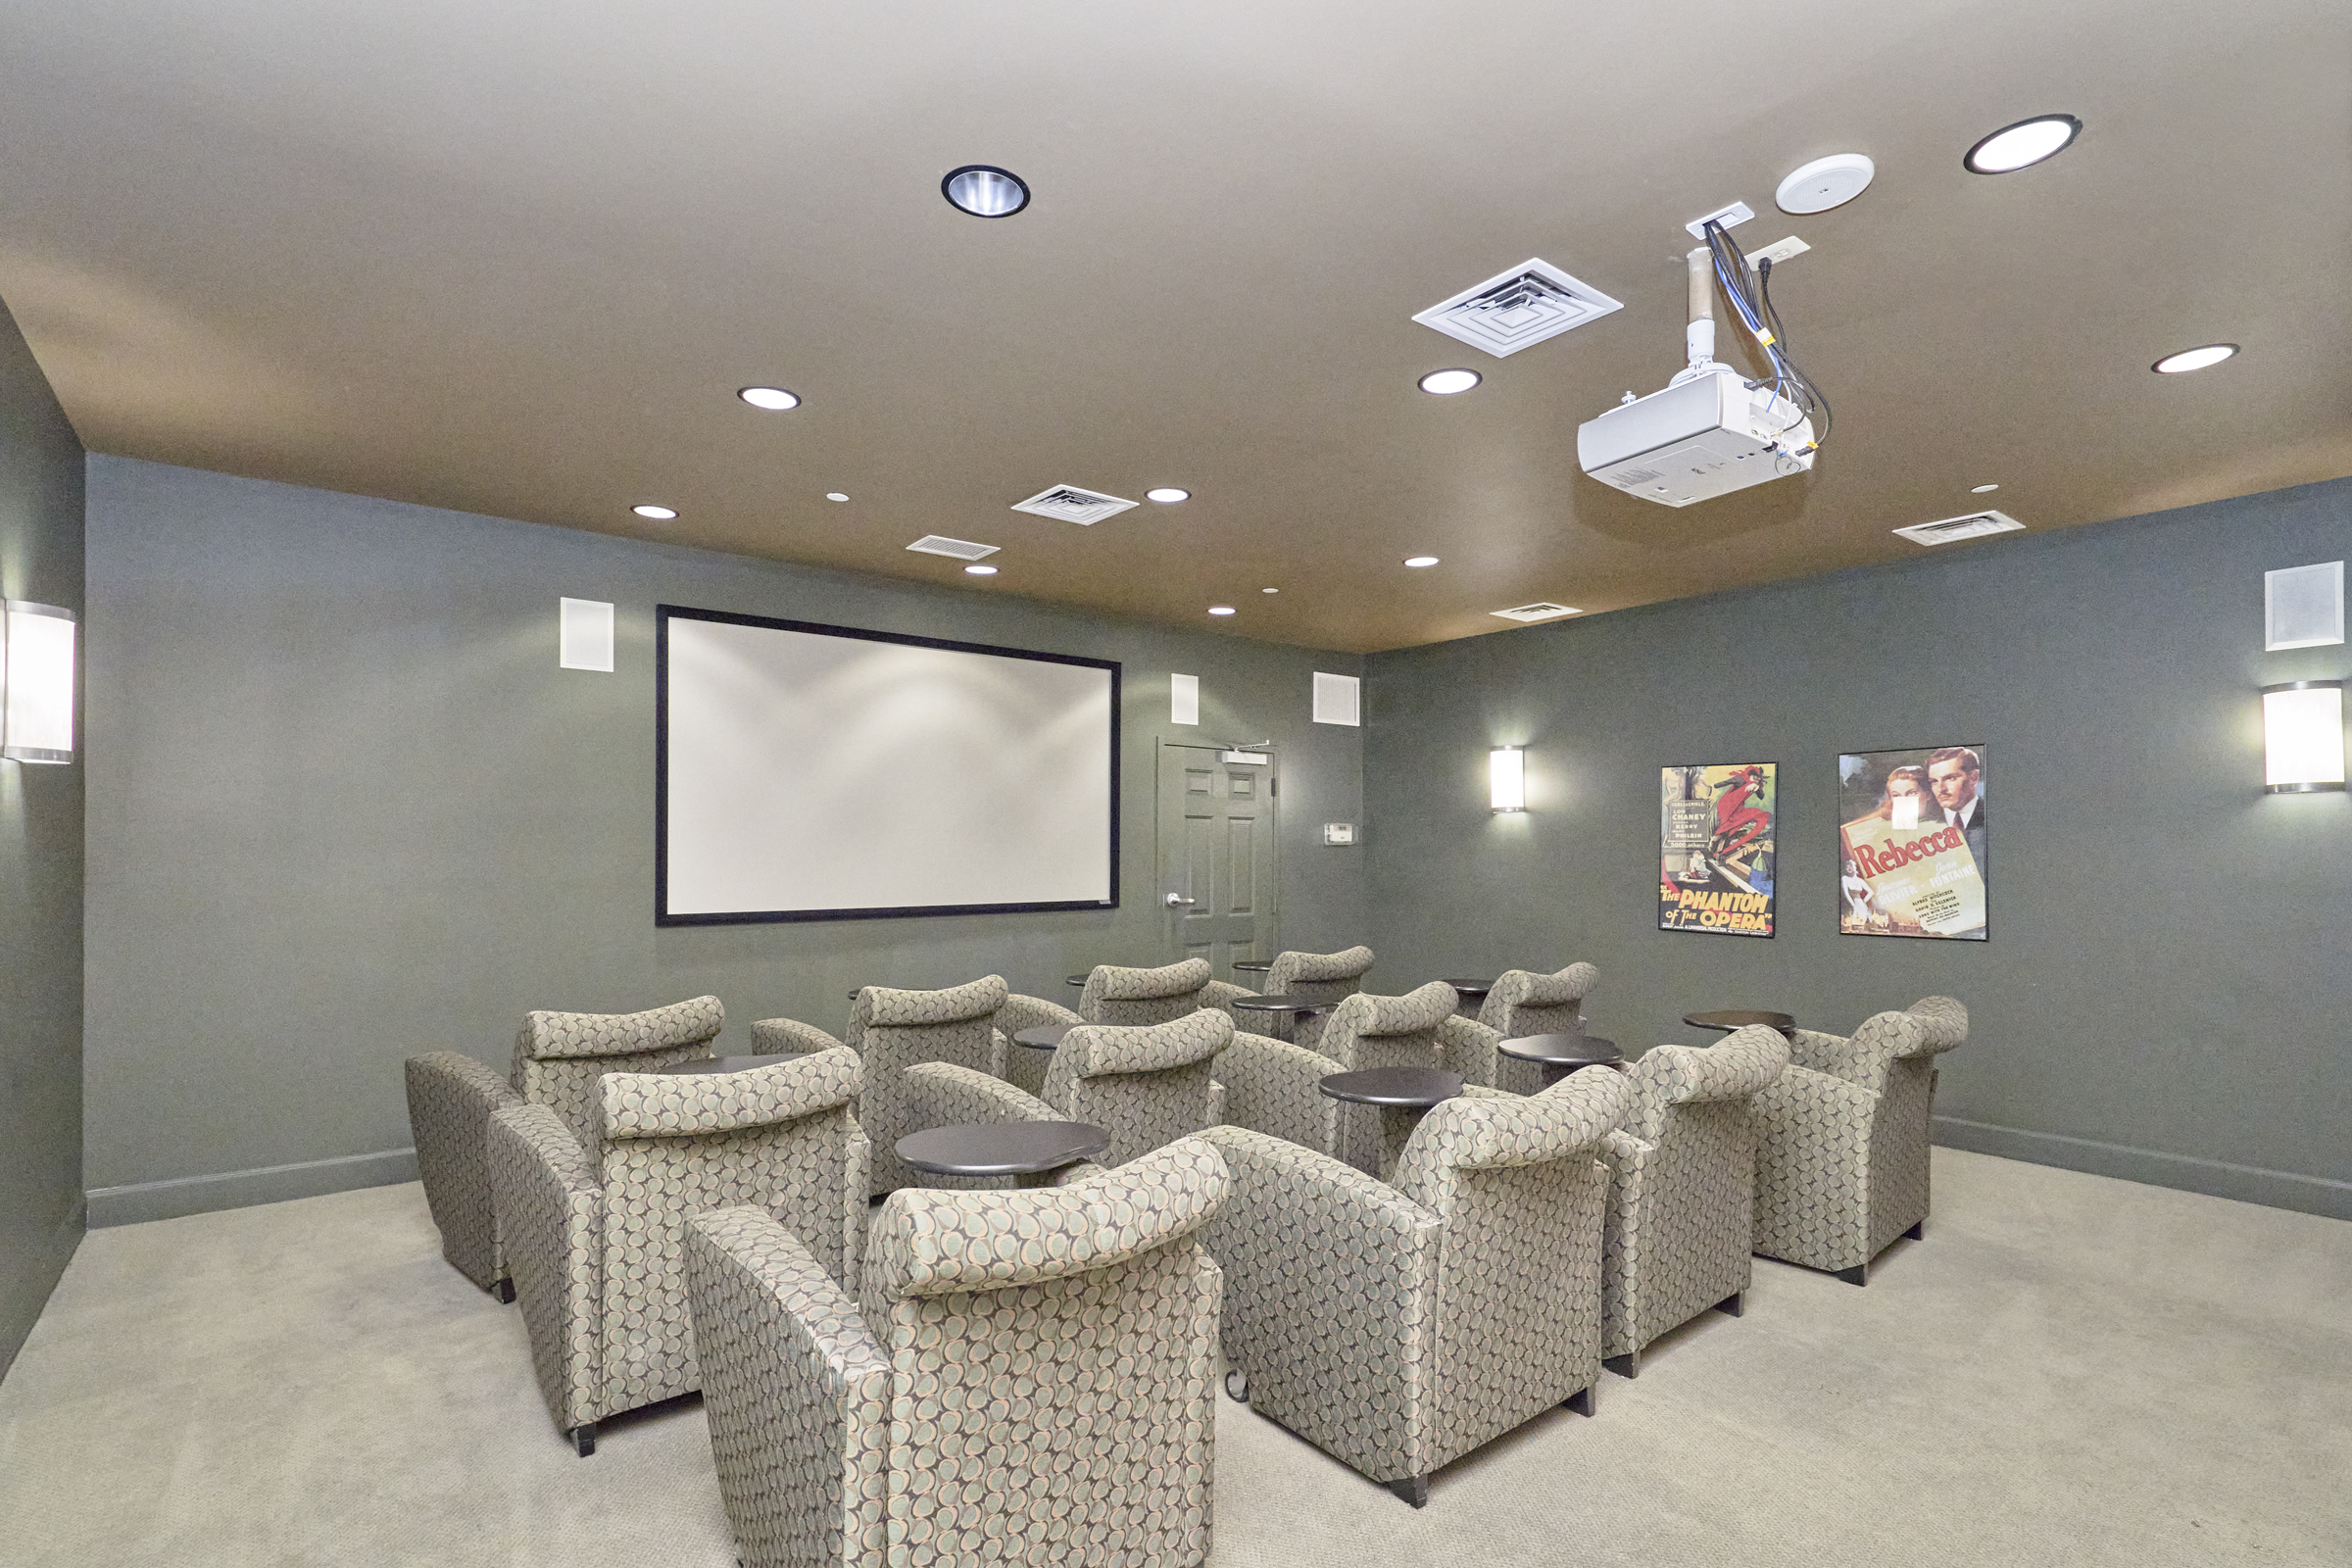 Interior professional photo of 11800 Sunset Hills Road, showing the private movie theater available to residents